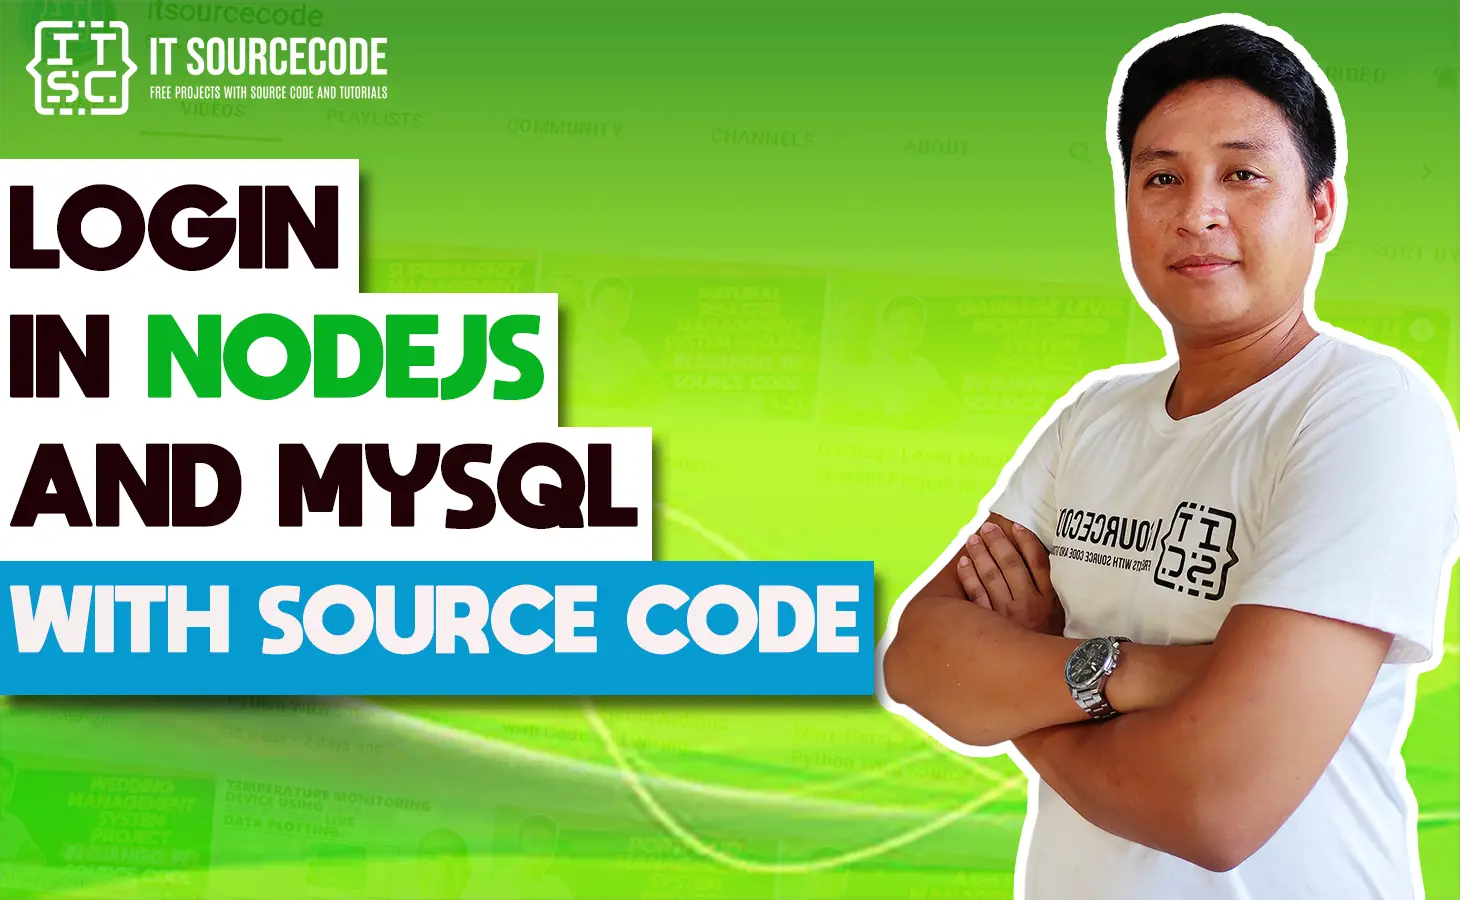 Login in NodeJS and MySQL with Source Code